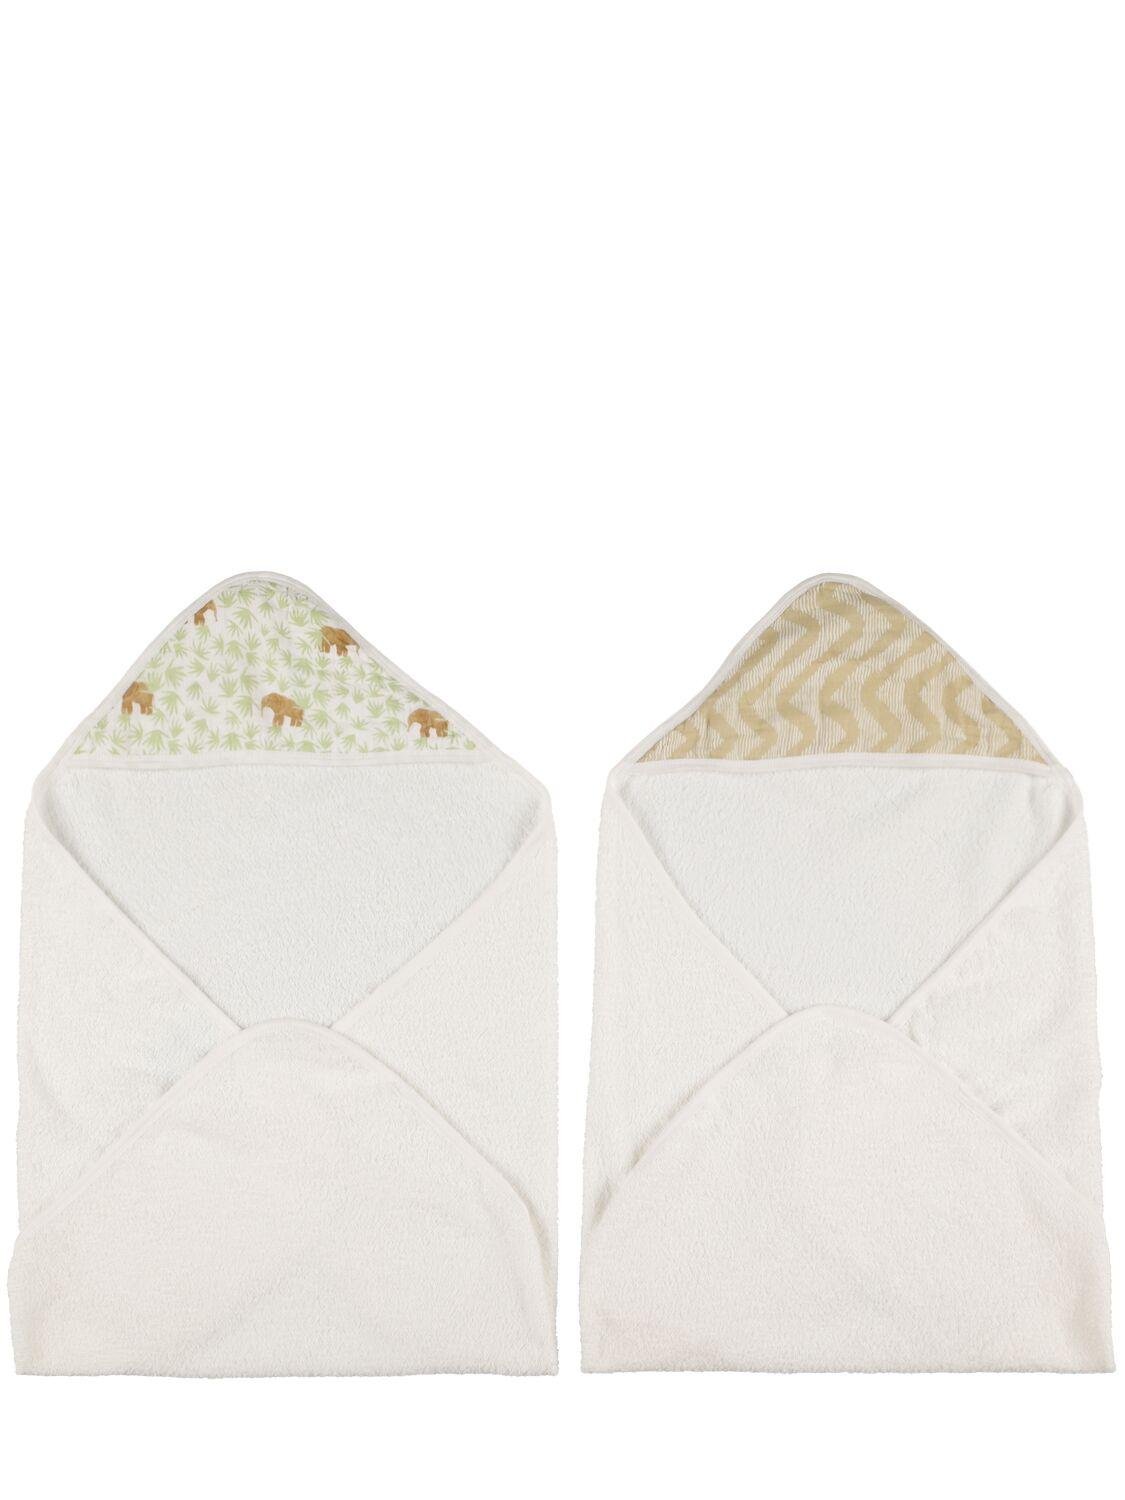 Hooded Printed Cotton Towels by ADEN + ANAIS